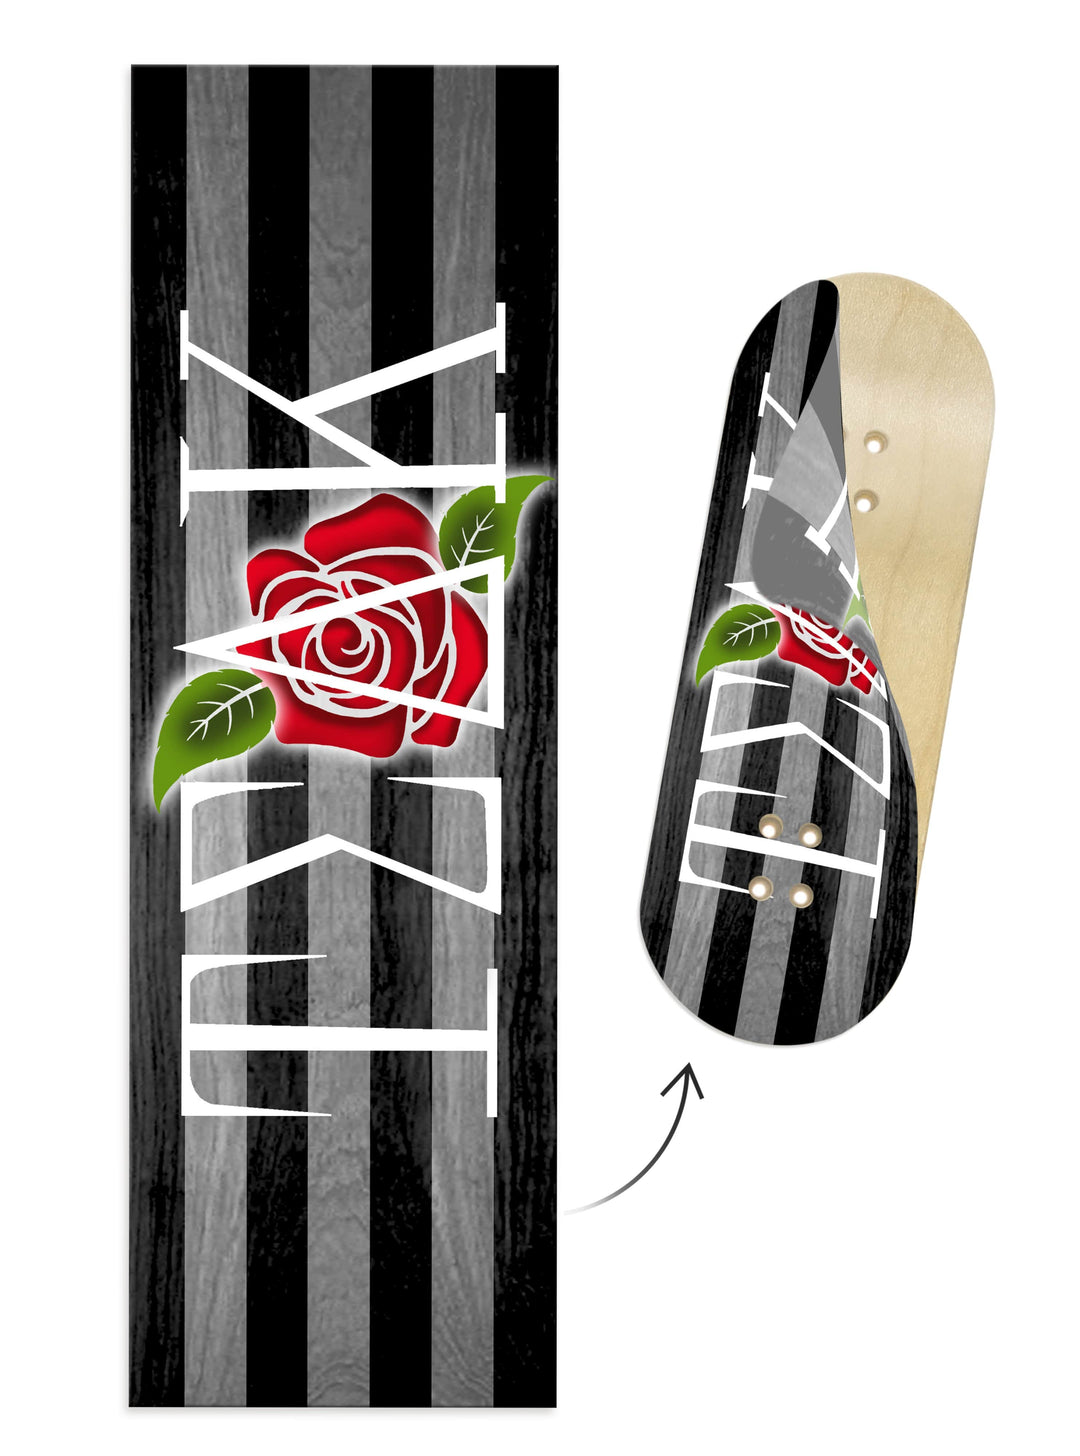 Teak Tuning "Petal Power" WellVentions Collaboration Deck Graphic Wrap - Designed by A'Niyah (age 16) - 35mm x 110mm